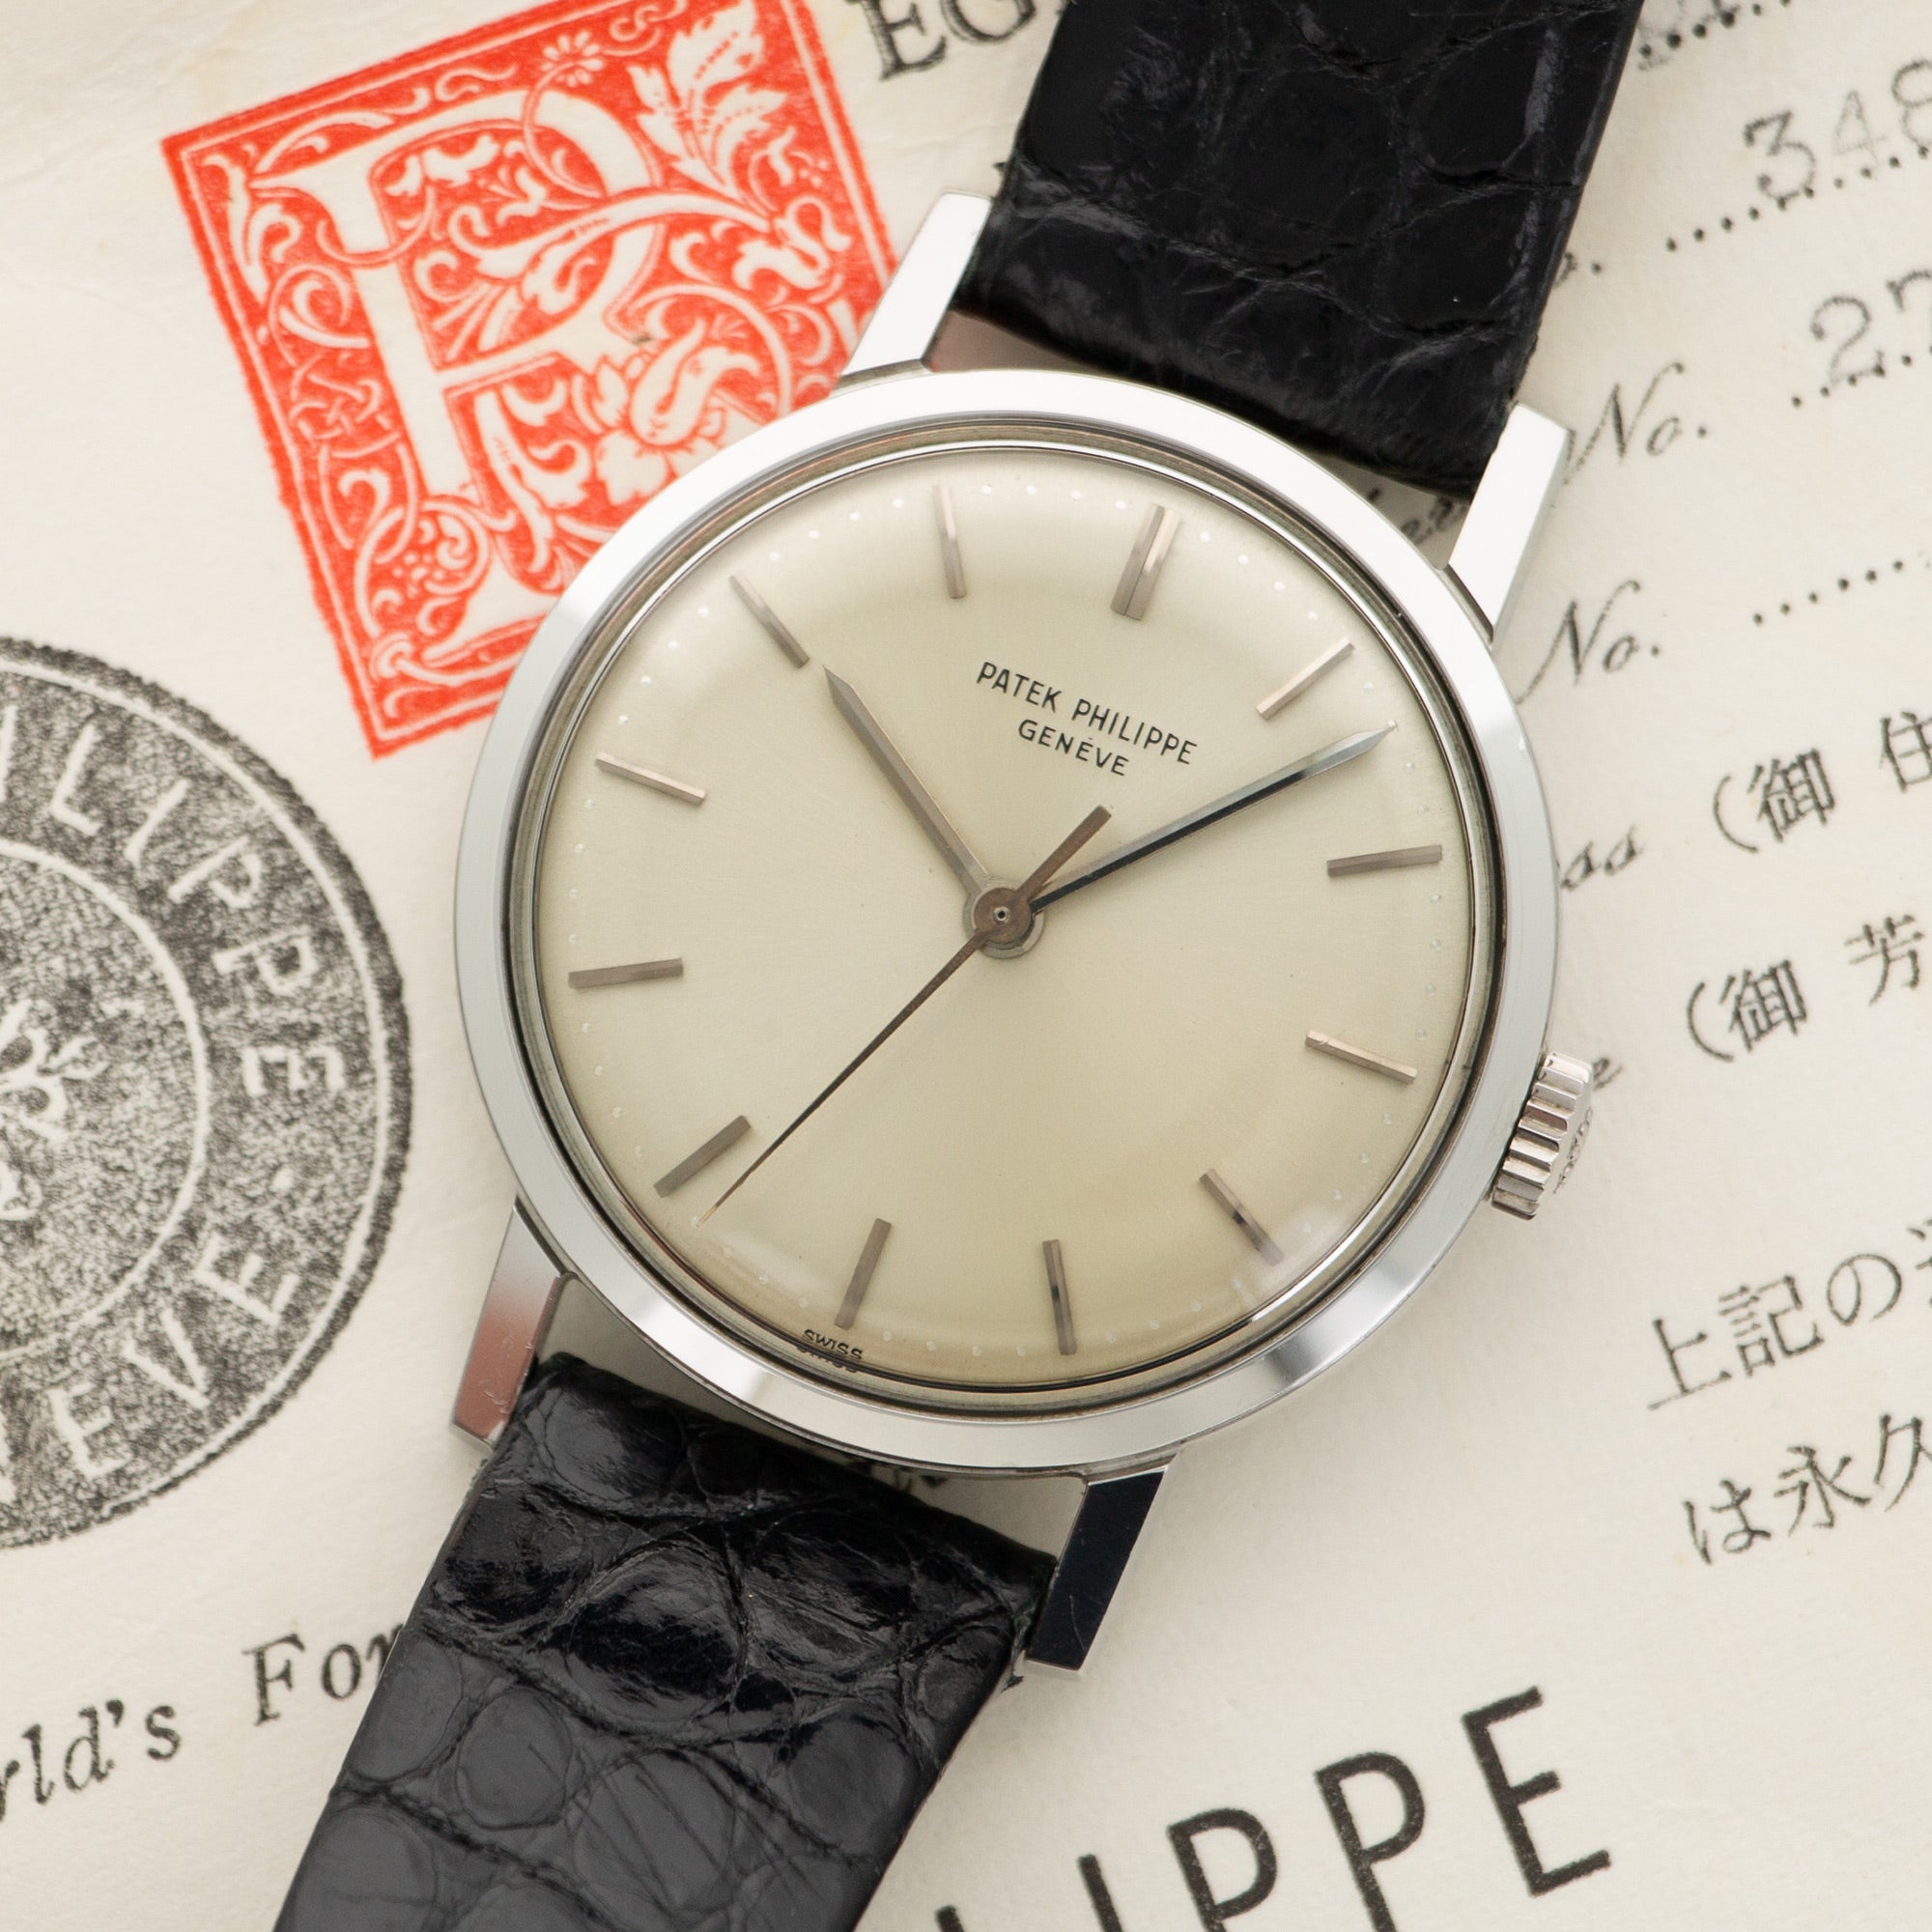 Patek Philippe - Patek Philippe Steel Watch Ref. 3483 with Original Box and Papers - The Keystone Watches